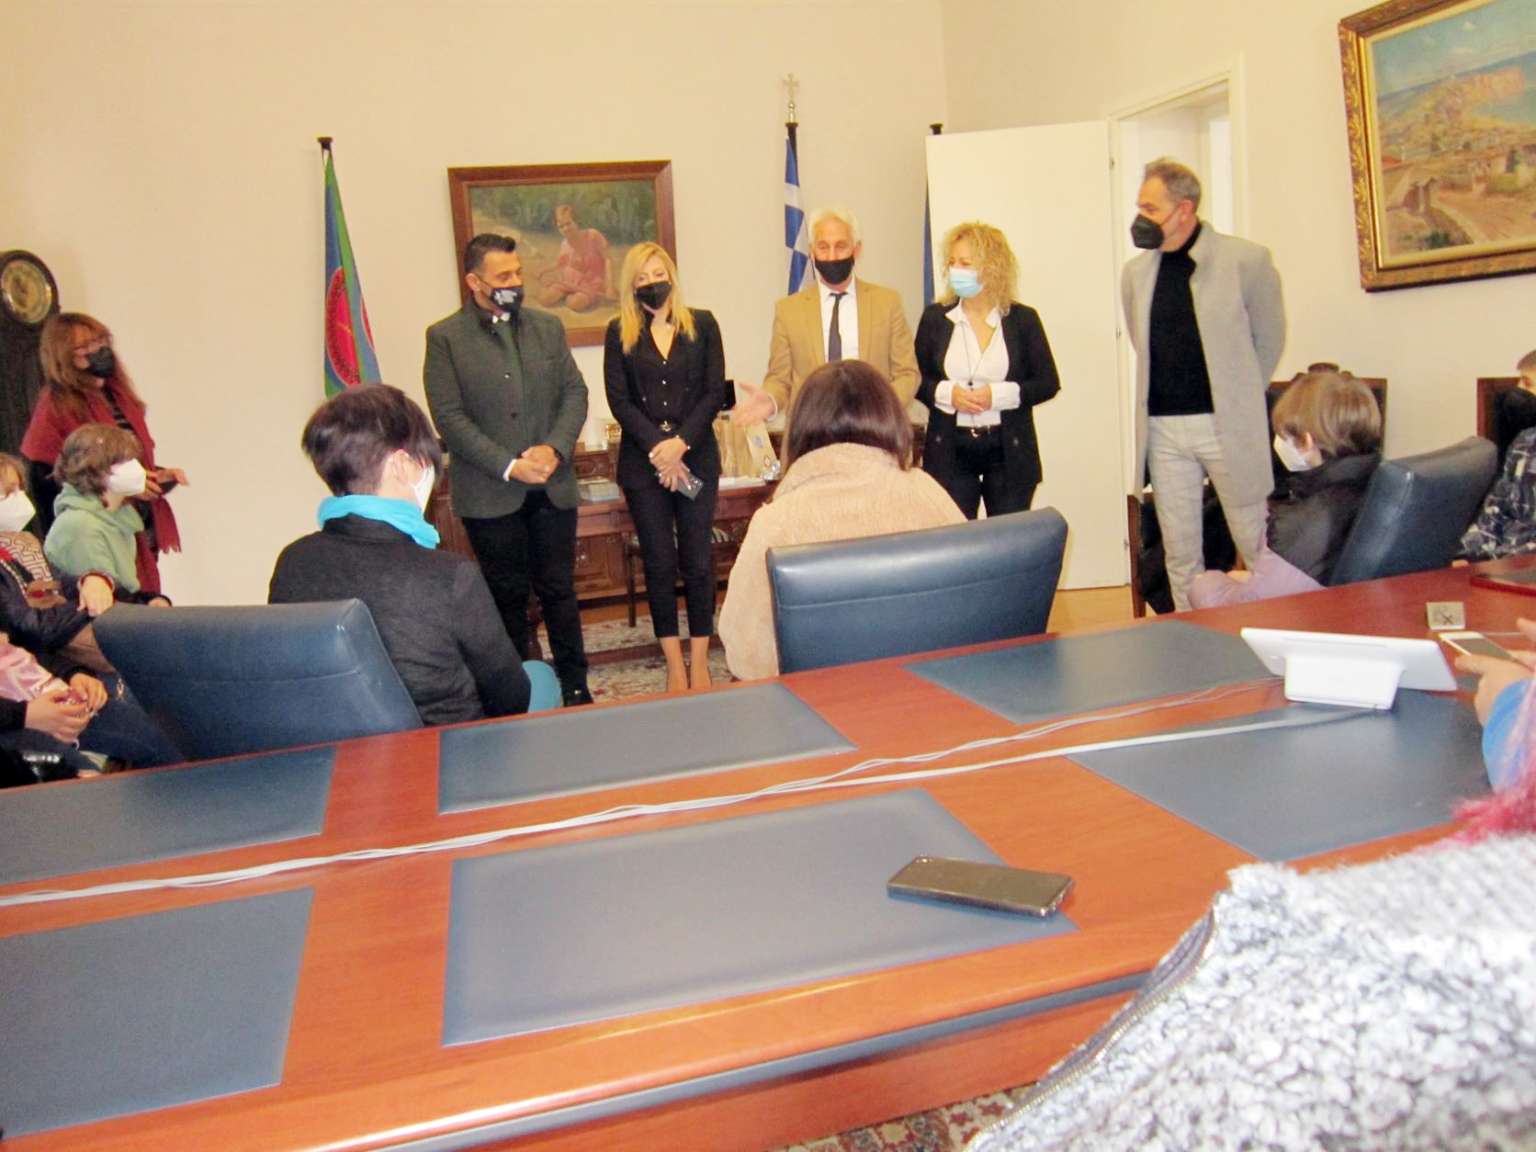 Xanthi was introduced to students and teachers from Poland, Turkey and Northern Macedonia